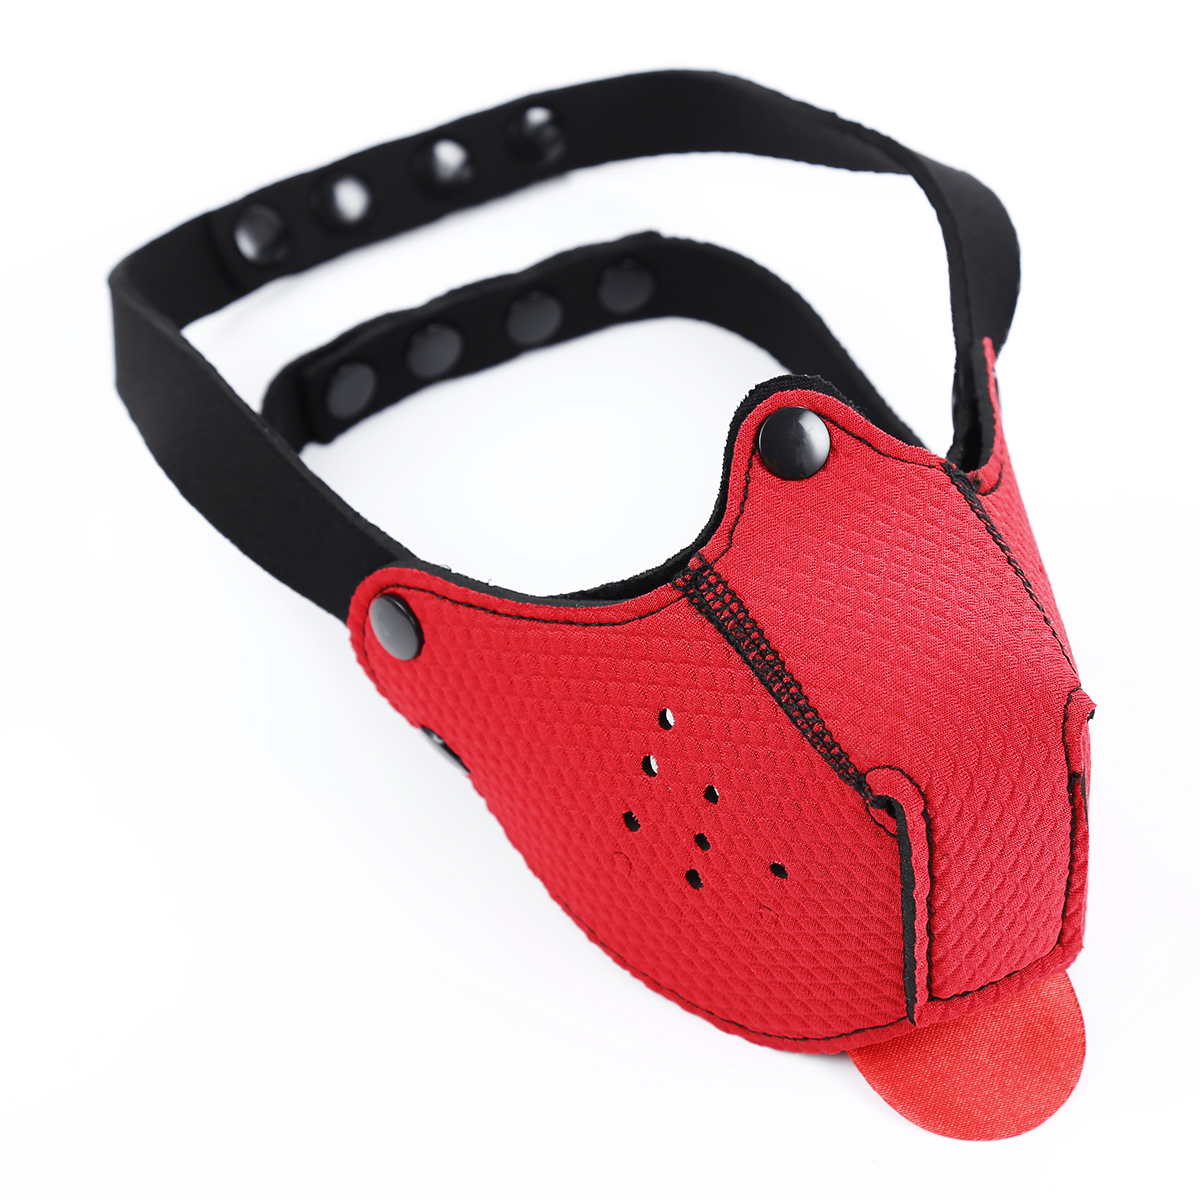 Neoprene-Puppy-Dog-Red-Mouth-Mask-OPR-321074-3